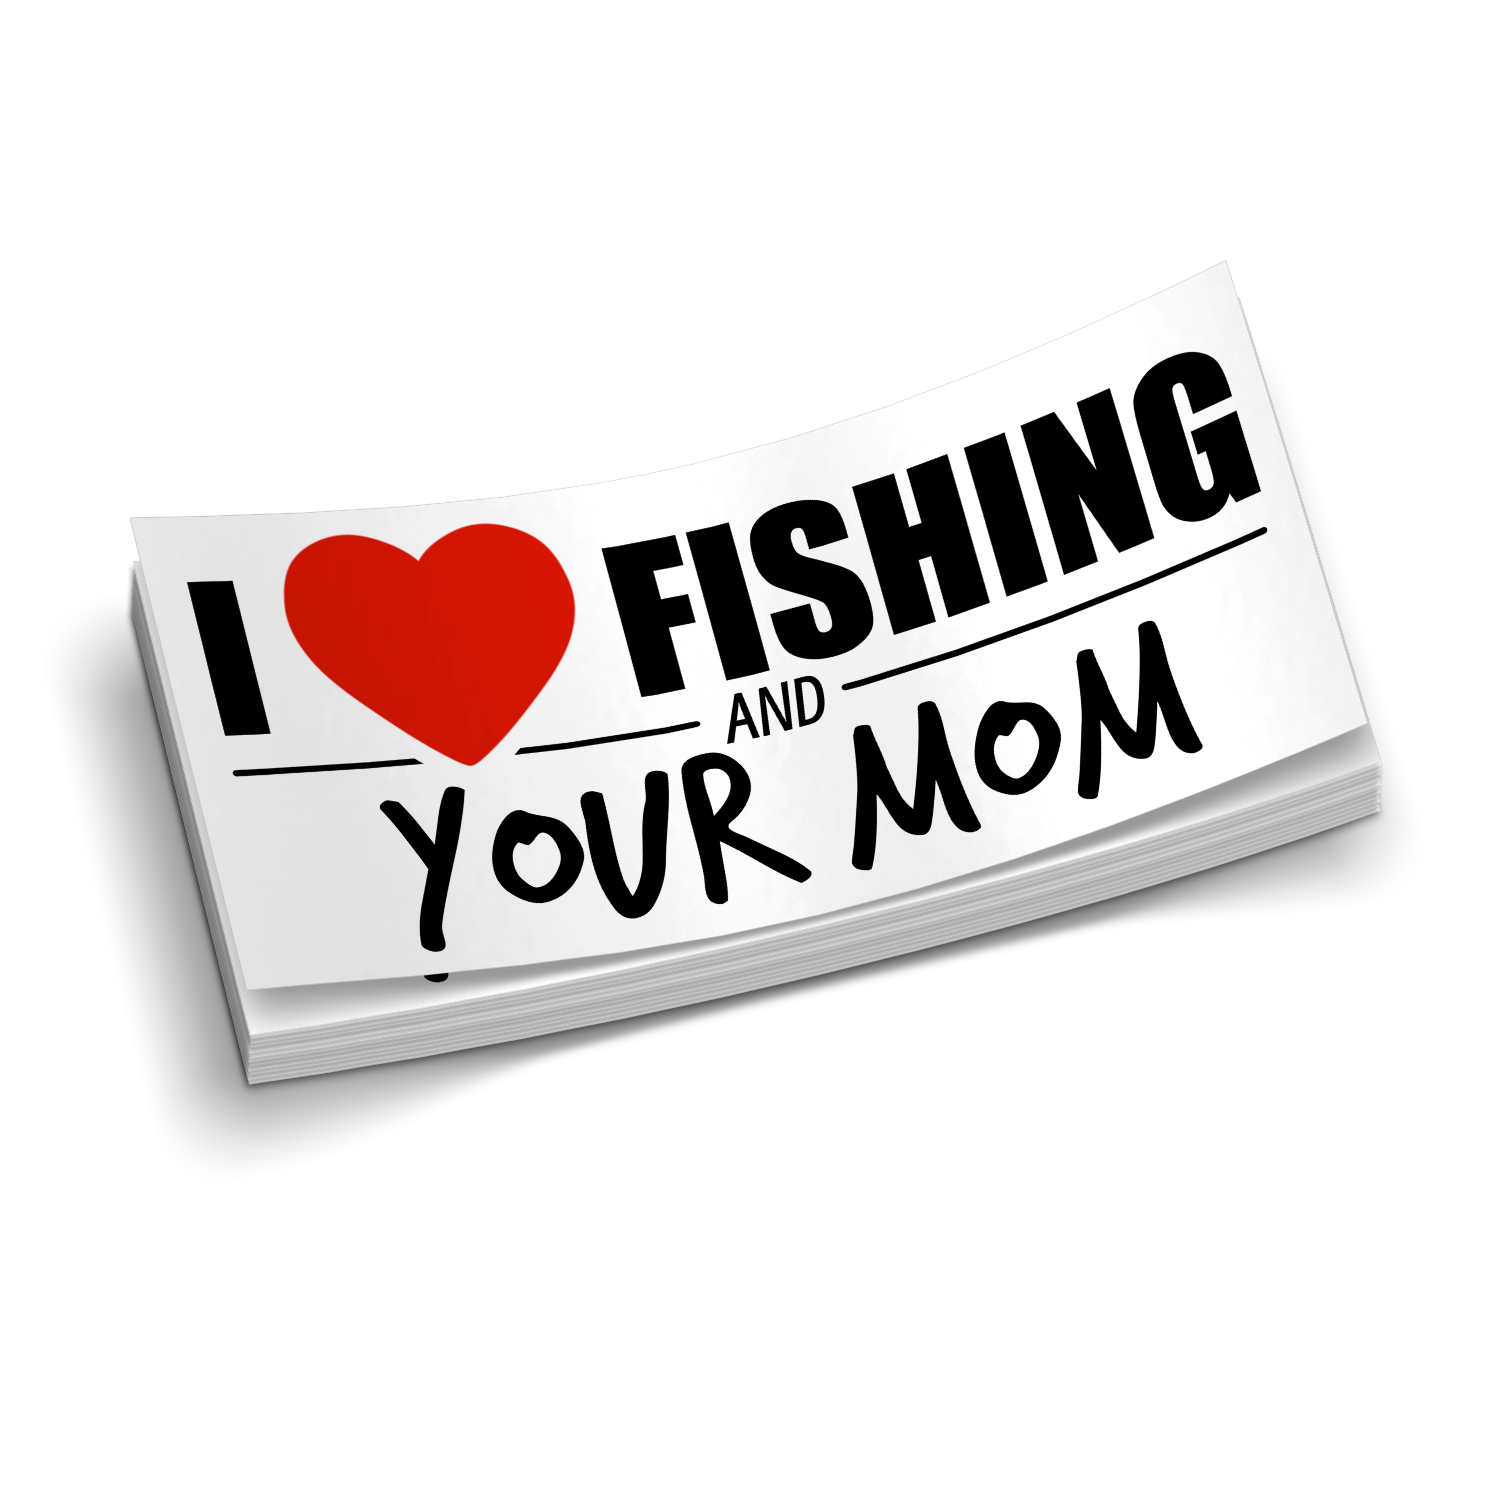 I Love Fishing And Your Mom - Funny Fishing Sticker